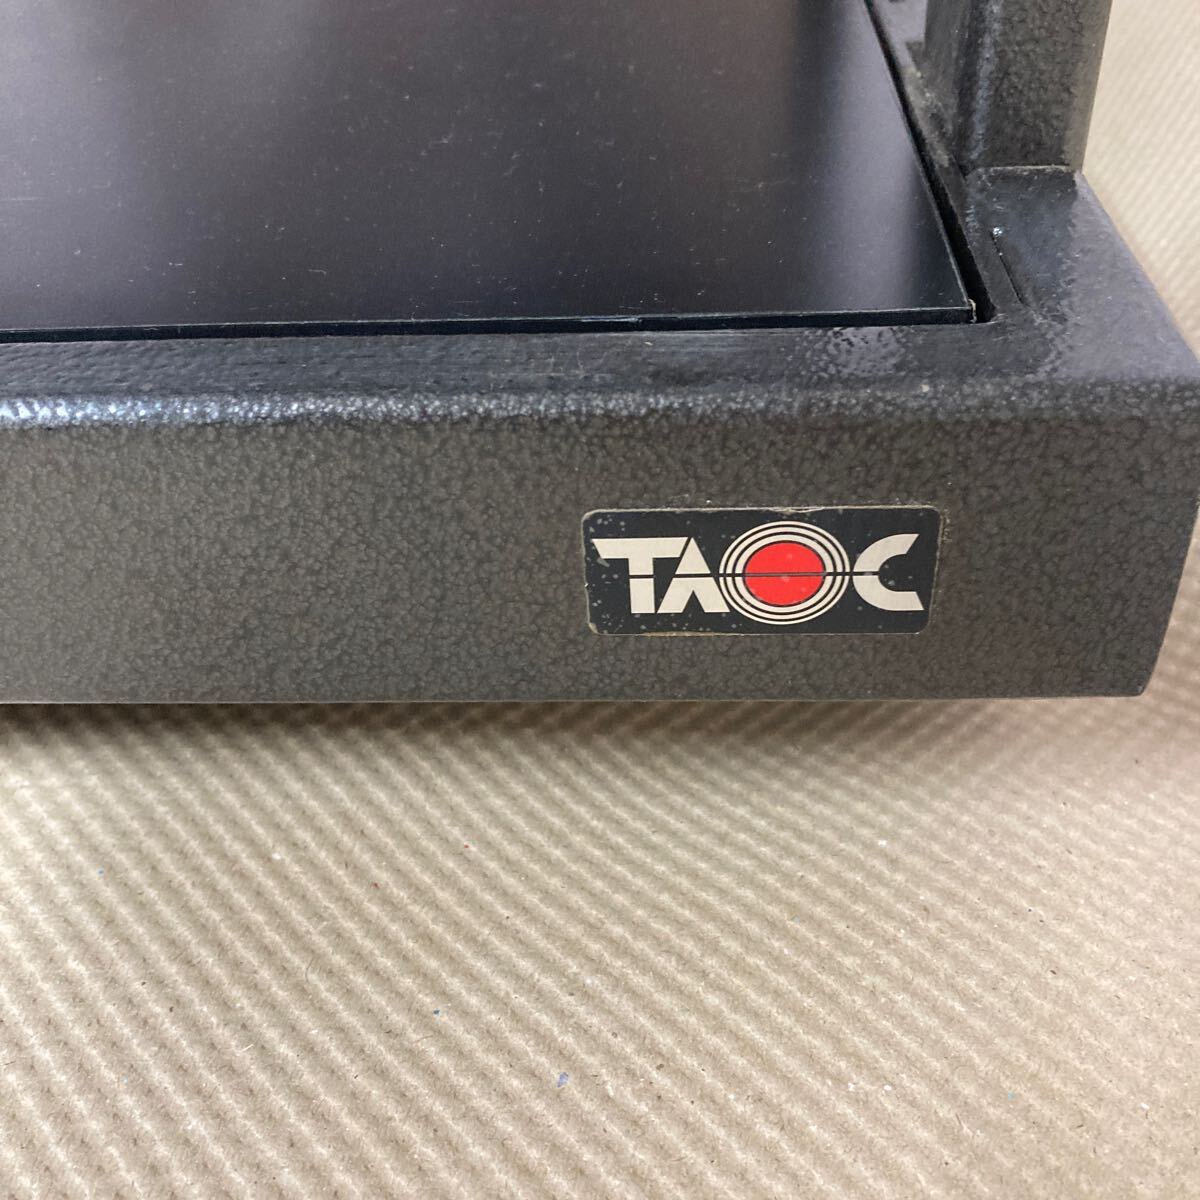 TAOC SS-3? audio rack used present condition goods taok3 step rack 3 step audio Lux pie k receive attaching SS series 